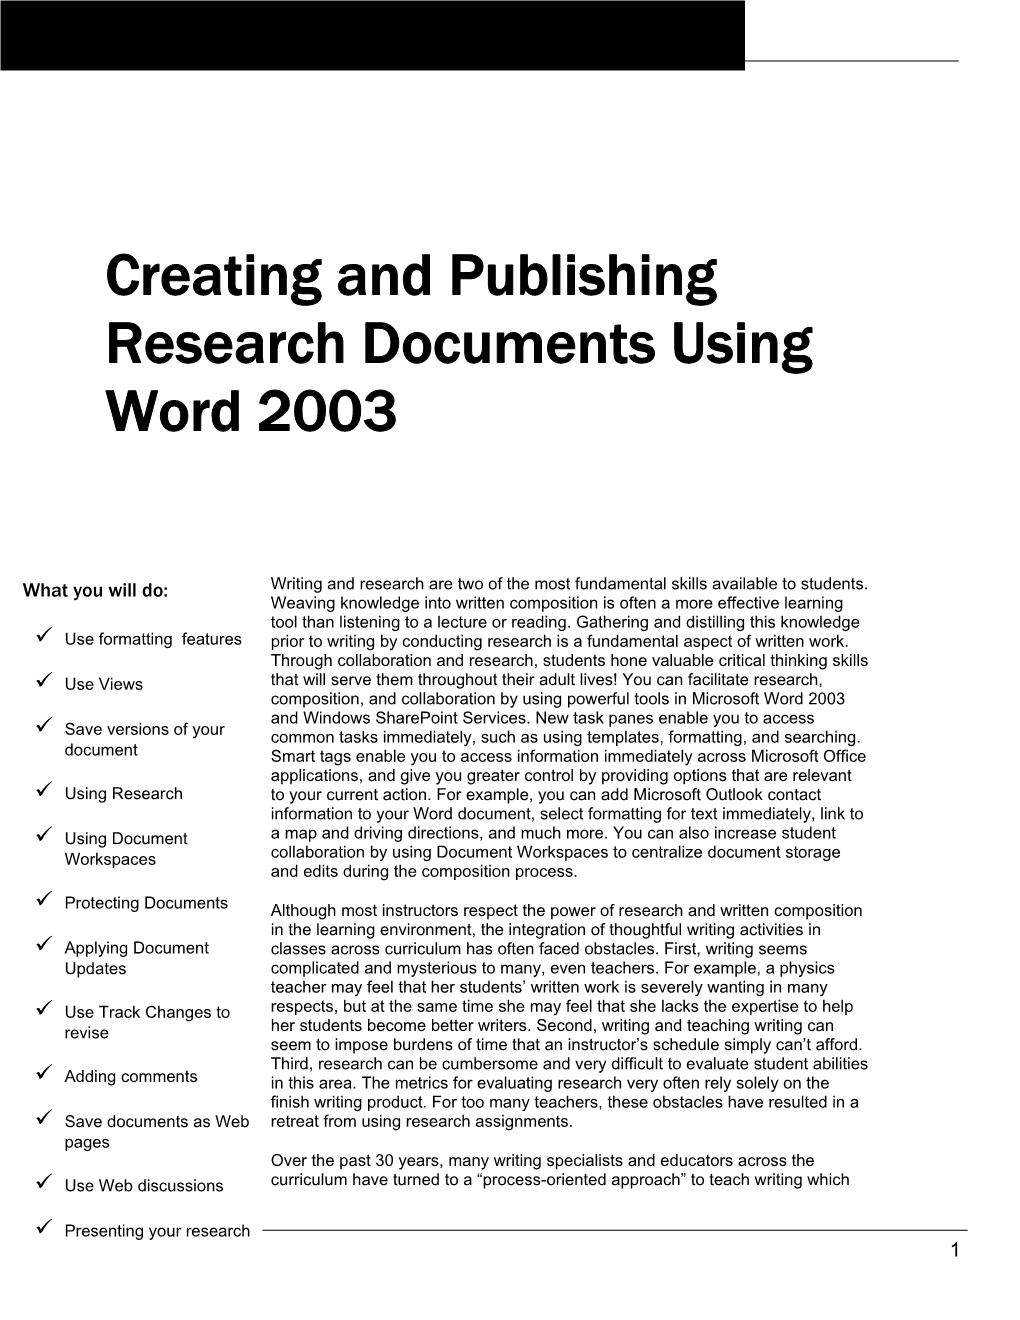 Creating and Publishing Research Documents Using Word 2003